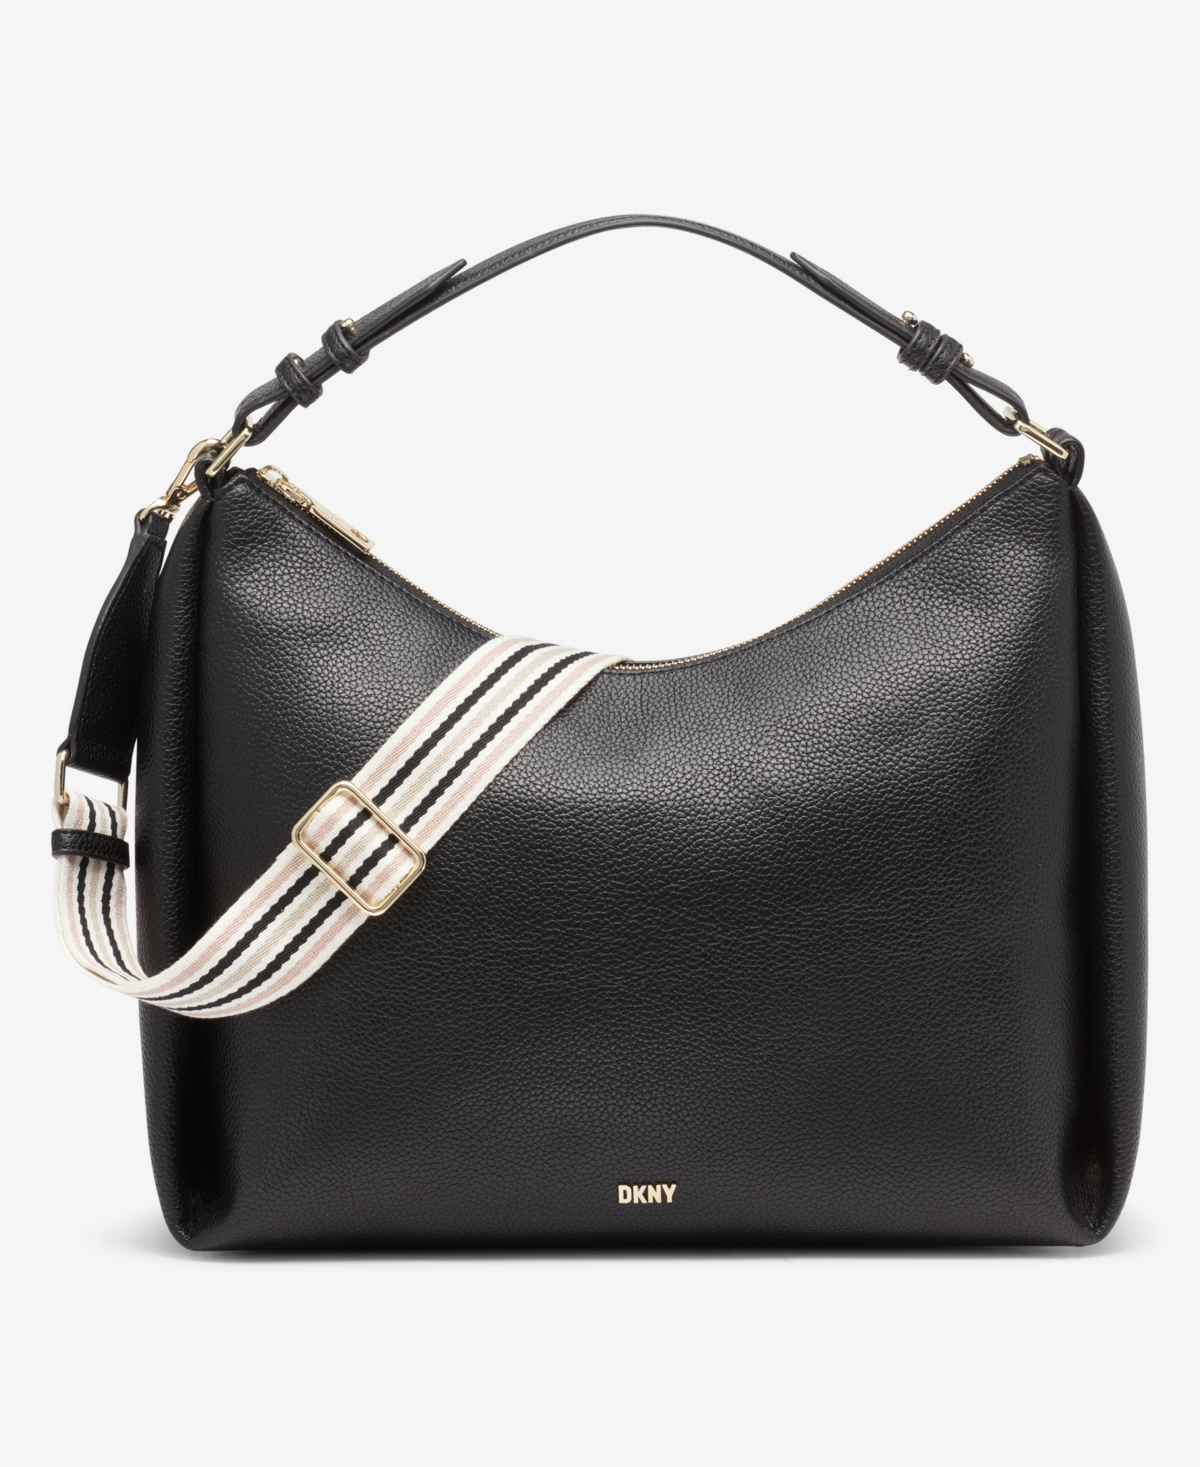 Dkny Hailey Convertible Hobo Bag In Blk,gold